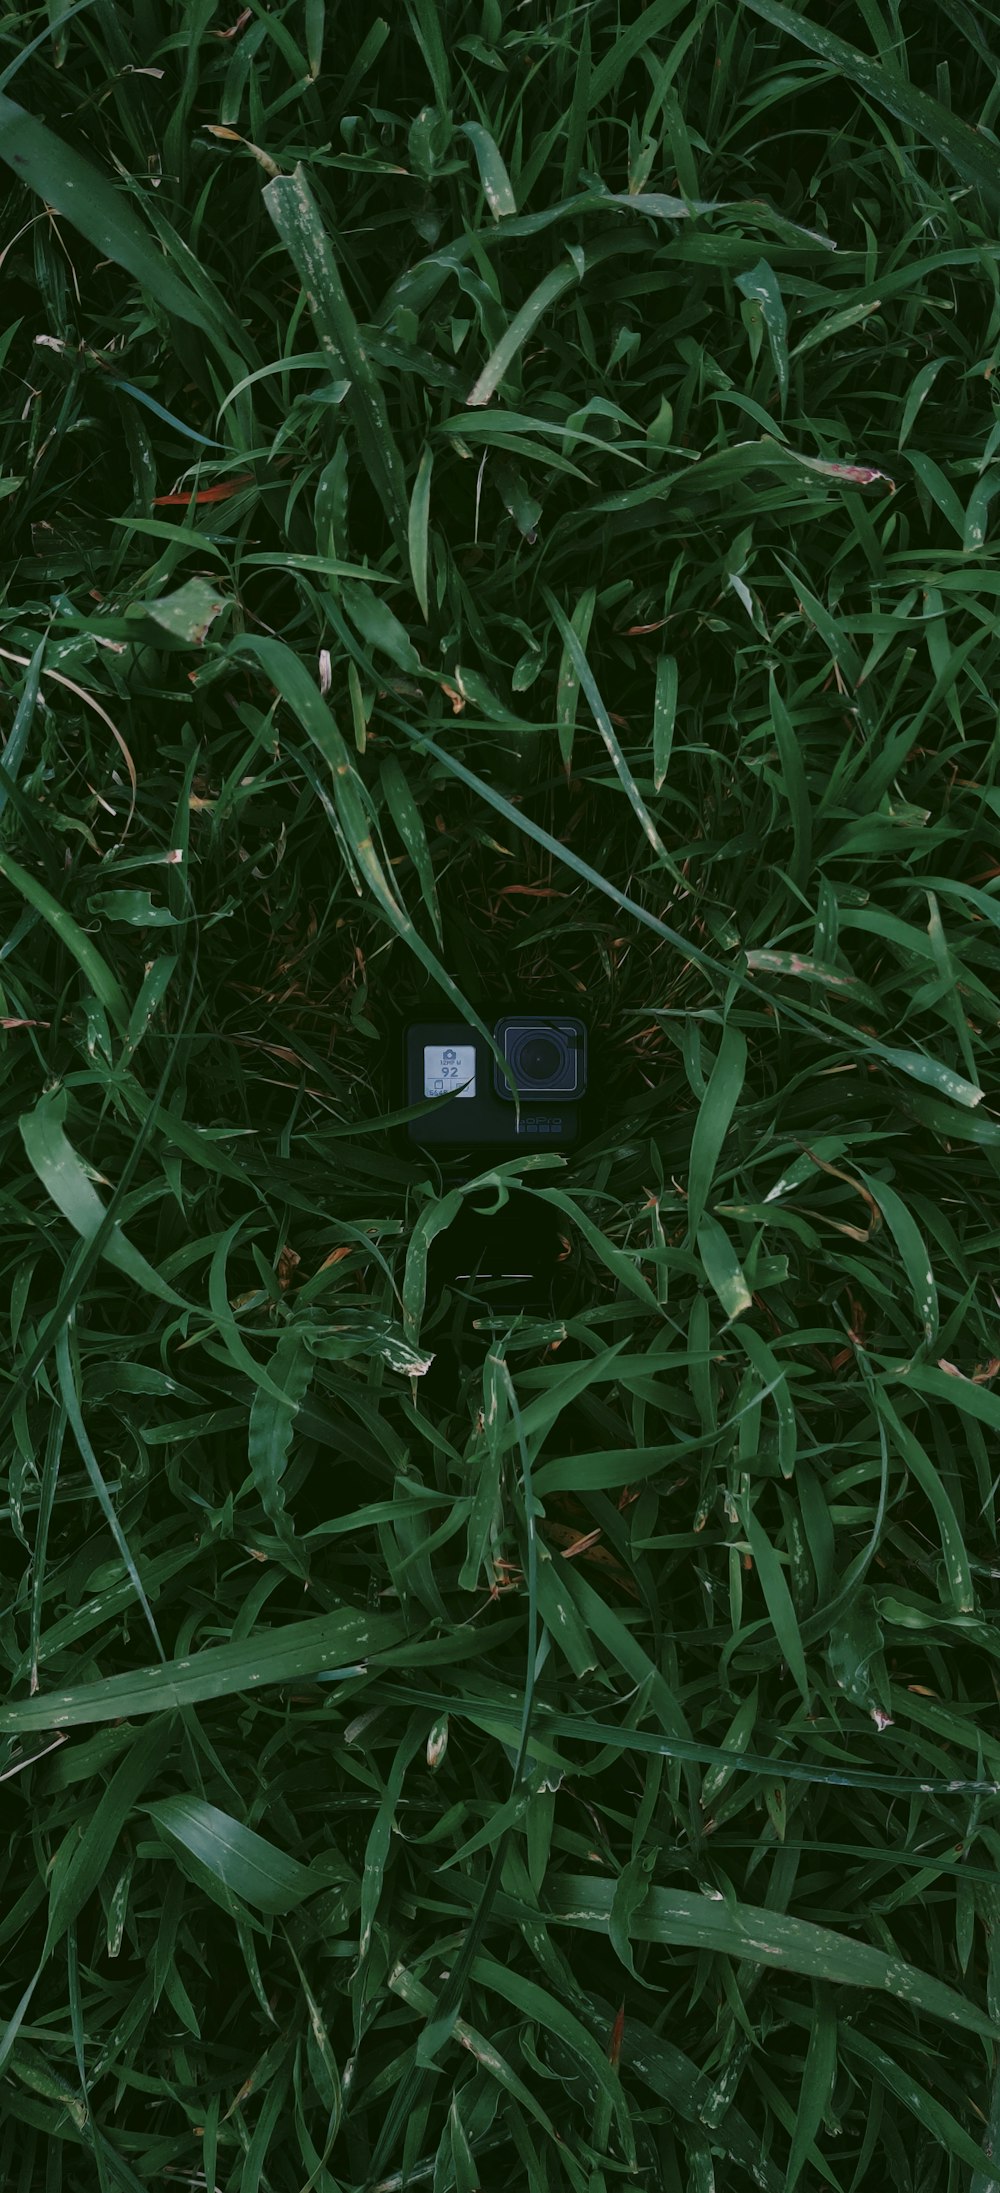 a small black device in the grass